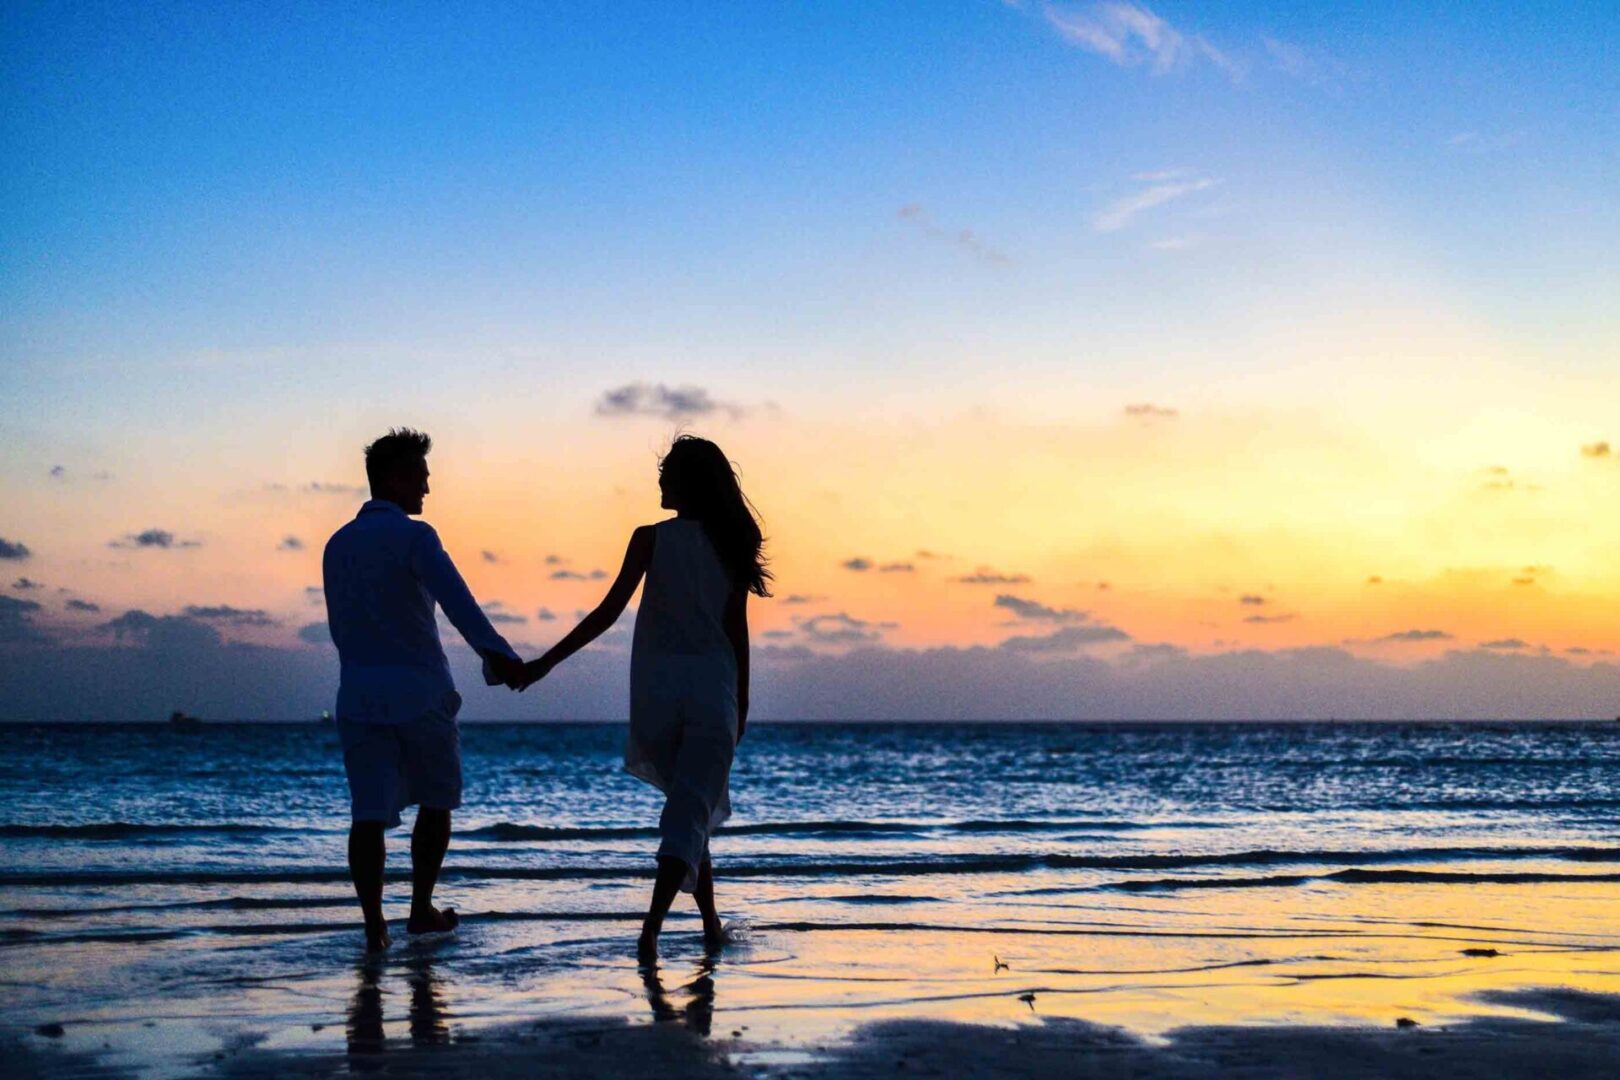 A man and woman holding hands on the beach.